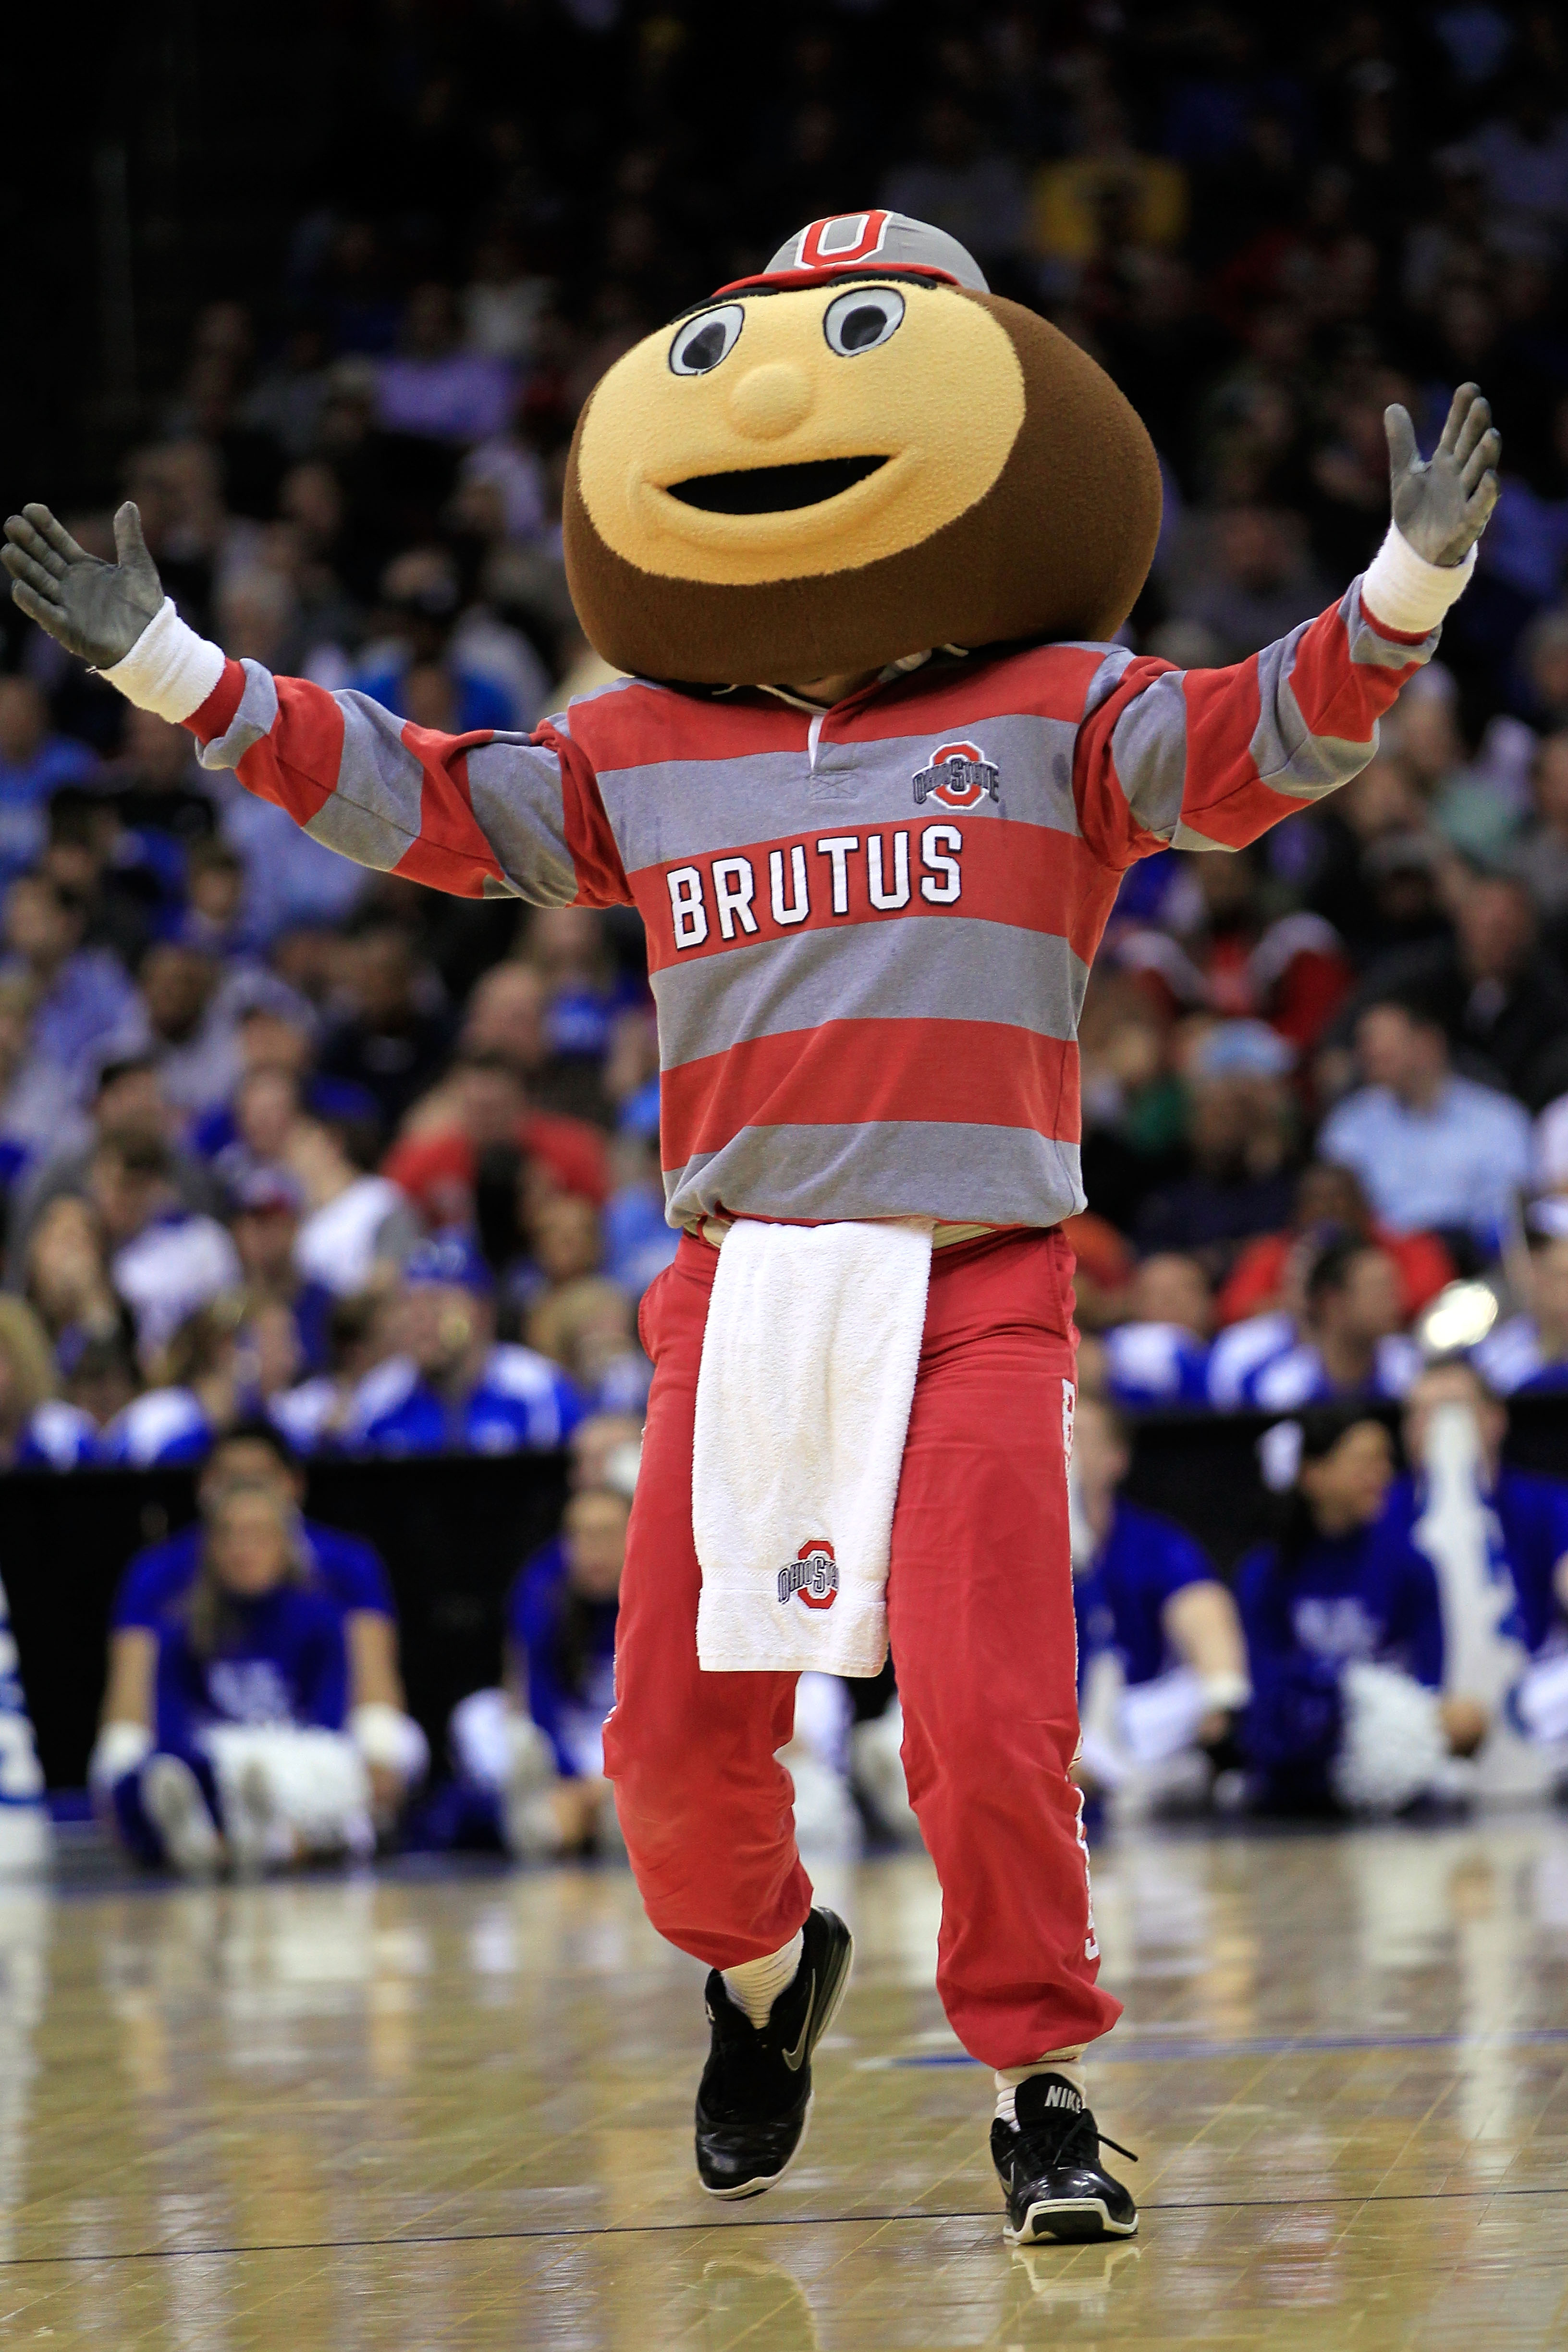 NEWARK, NJ - MARCH 25: Brutus the Ohio State Buckeyes mascot walks on the court during the game against the Kentucky Wildcats in the east regional semifinal of the 2011 NCAA Men's Basketball Tournament at the Prudential Center on March 25, 2011 in Newark,